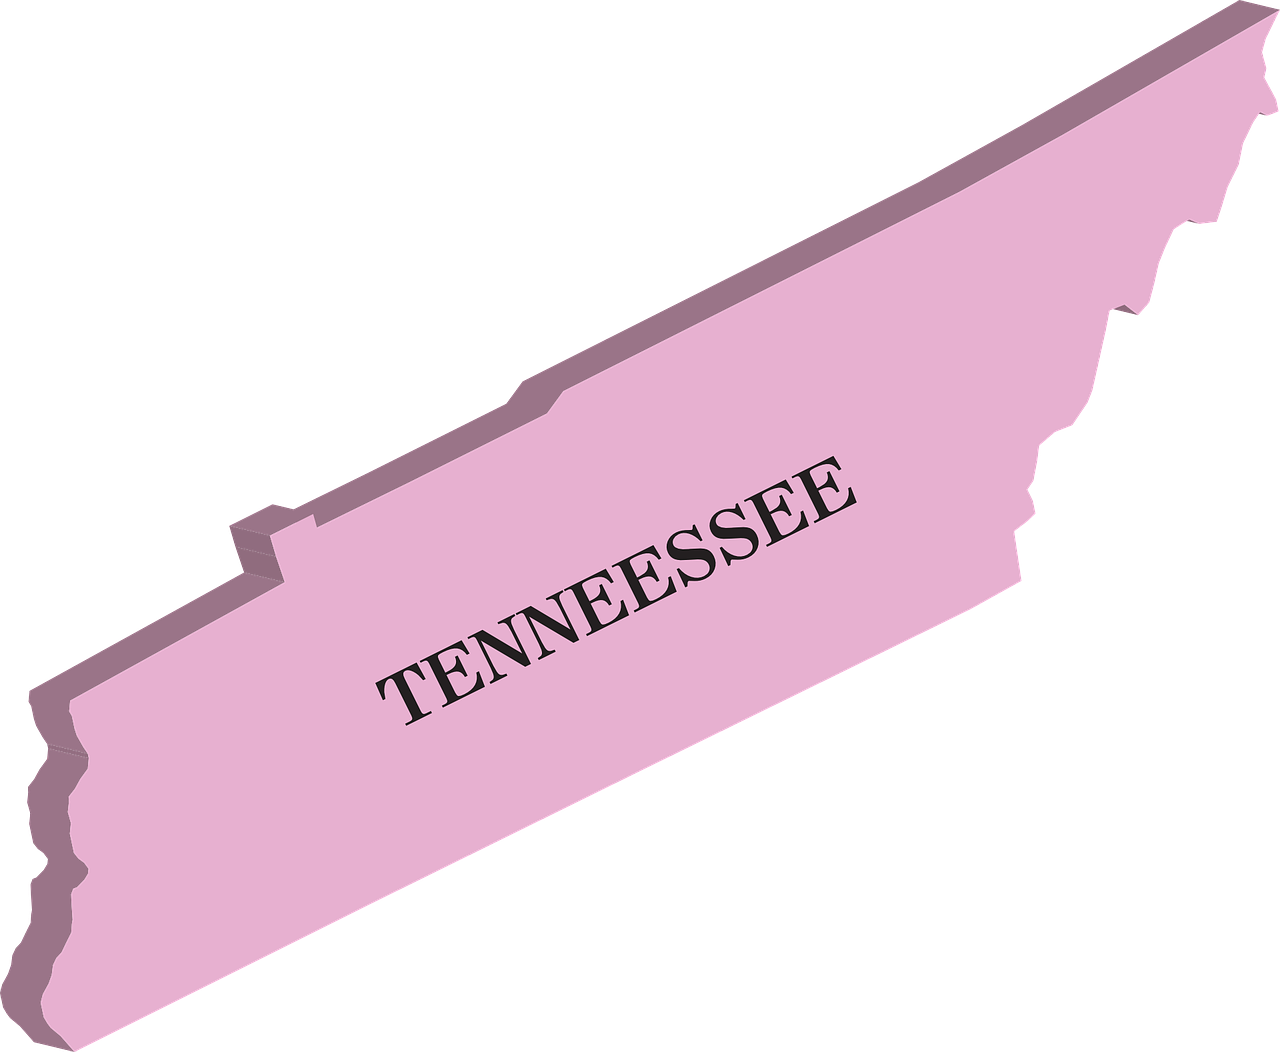 map tennessee state free photo